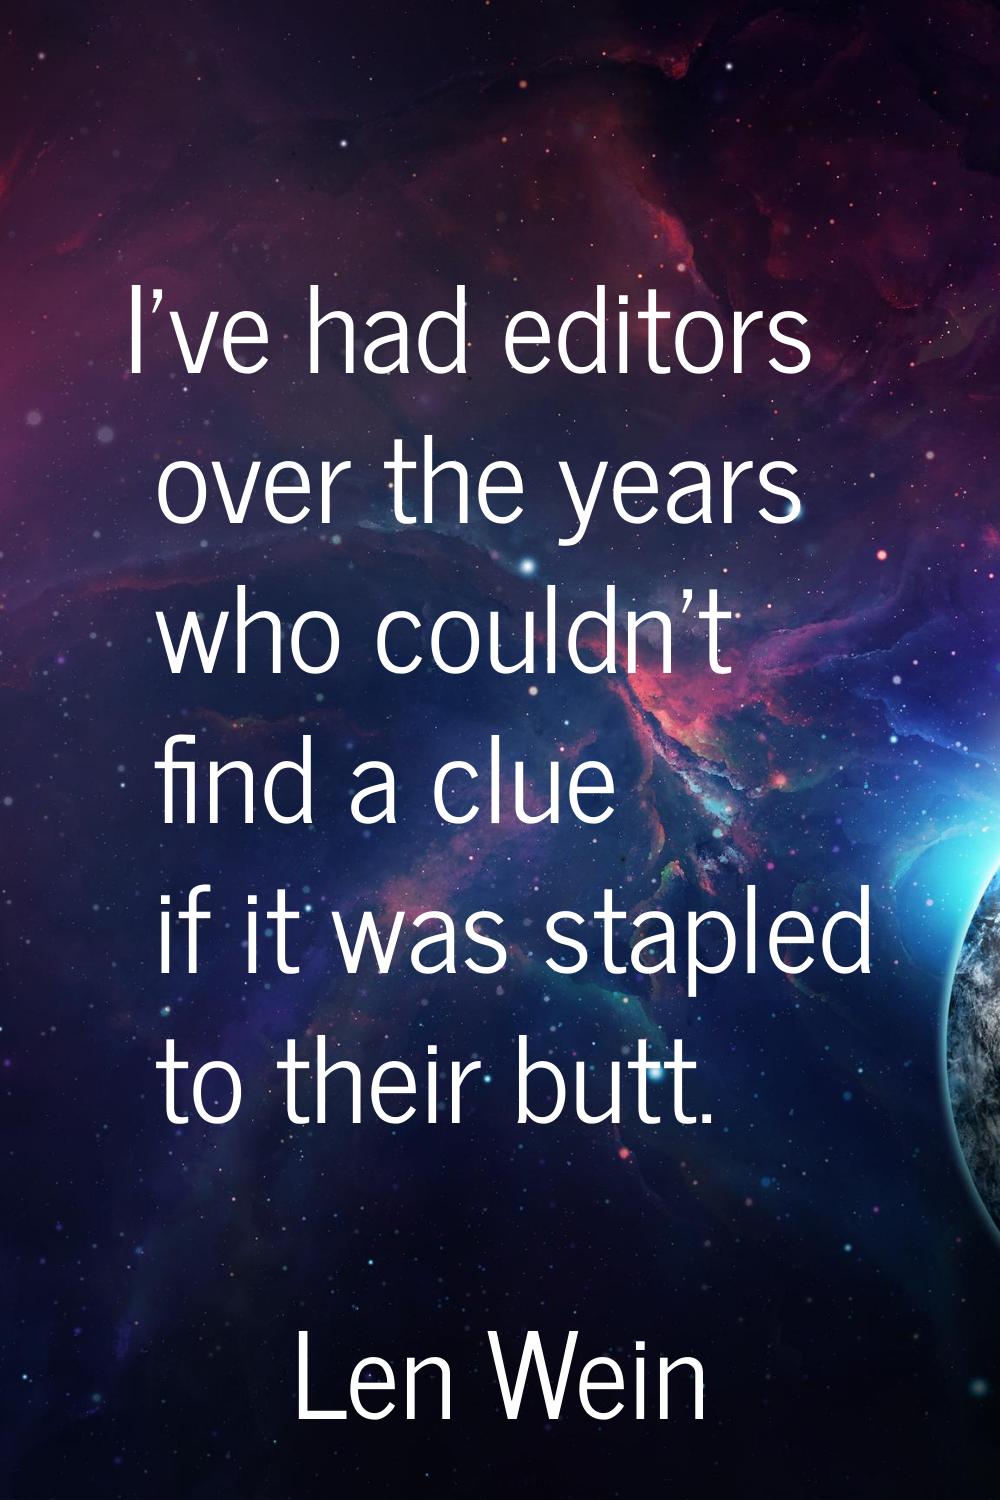 I've had editors over the years who couldn't find a clue if it was stapled to their butt.